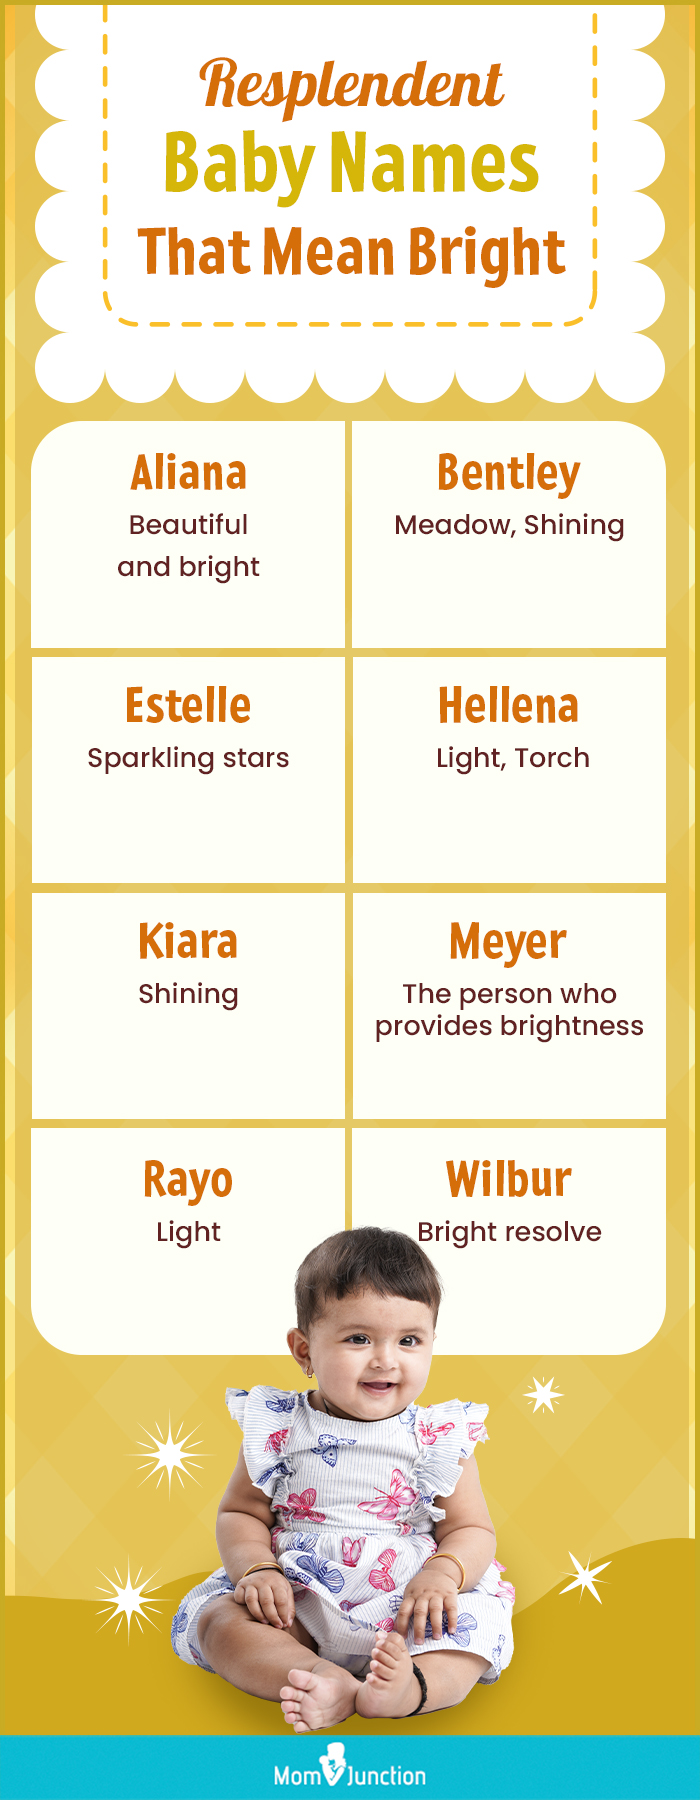 Resplendent Baby Names That Mean Bright (infographic)